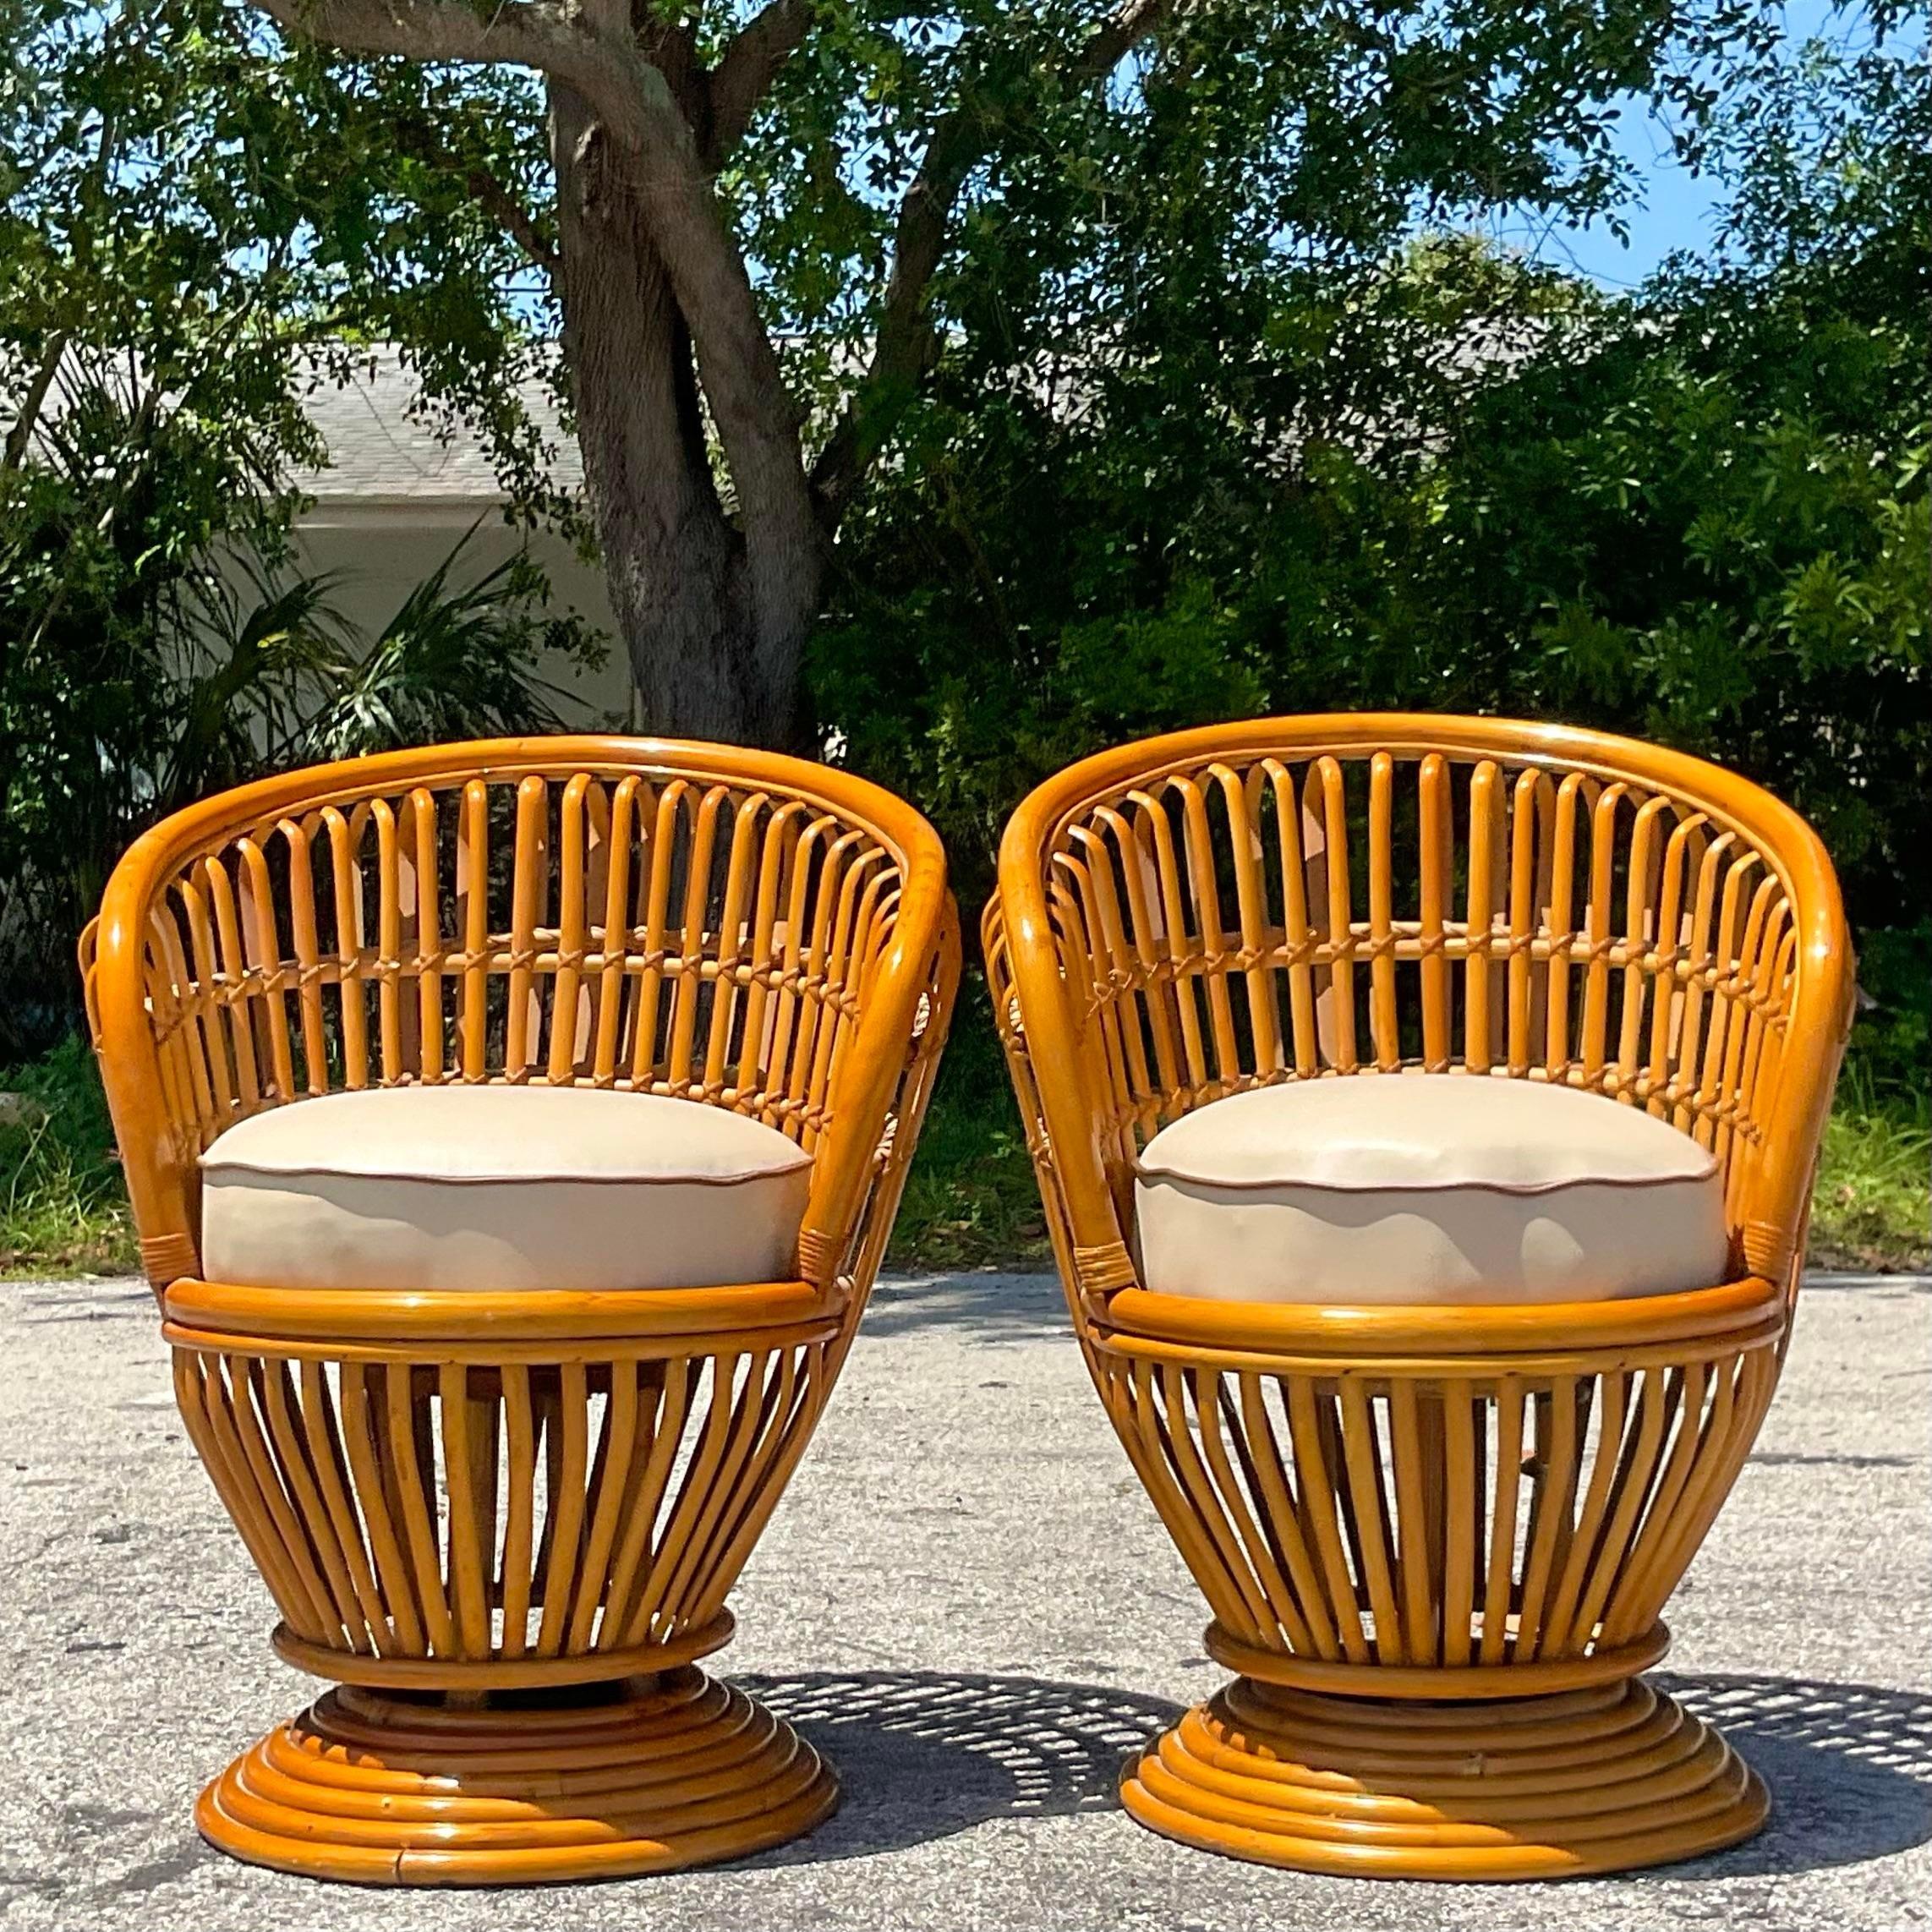 20th Century Vintage Coastal Bent Rattan Swivel Chairs After Albini - a Pair For Sale